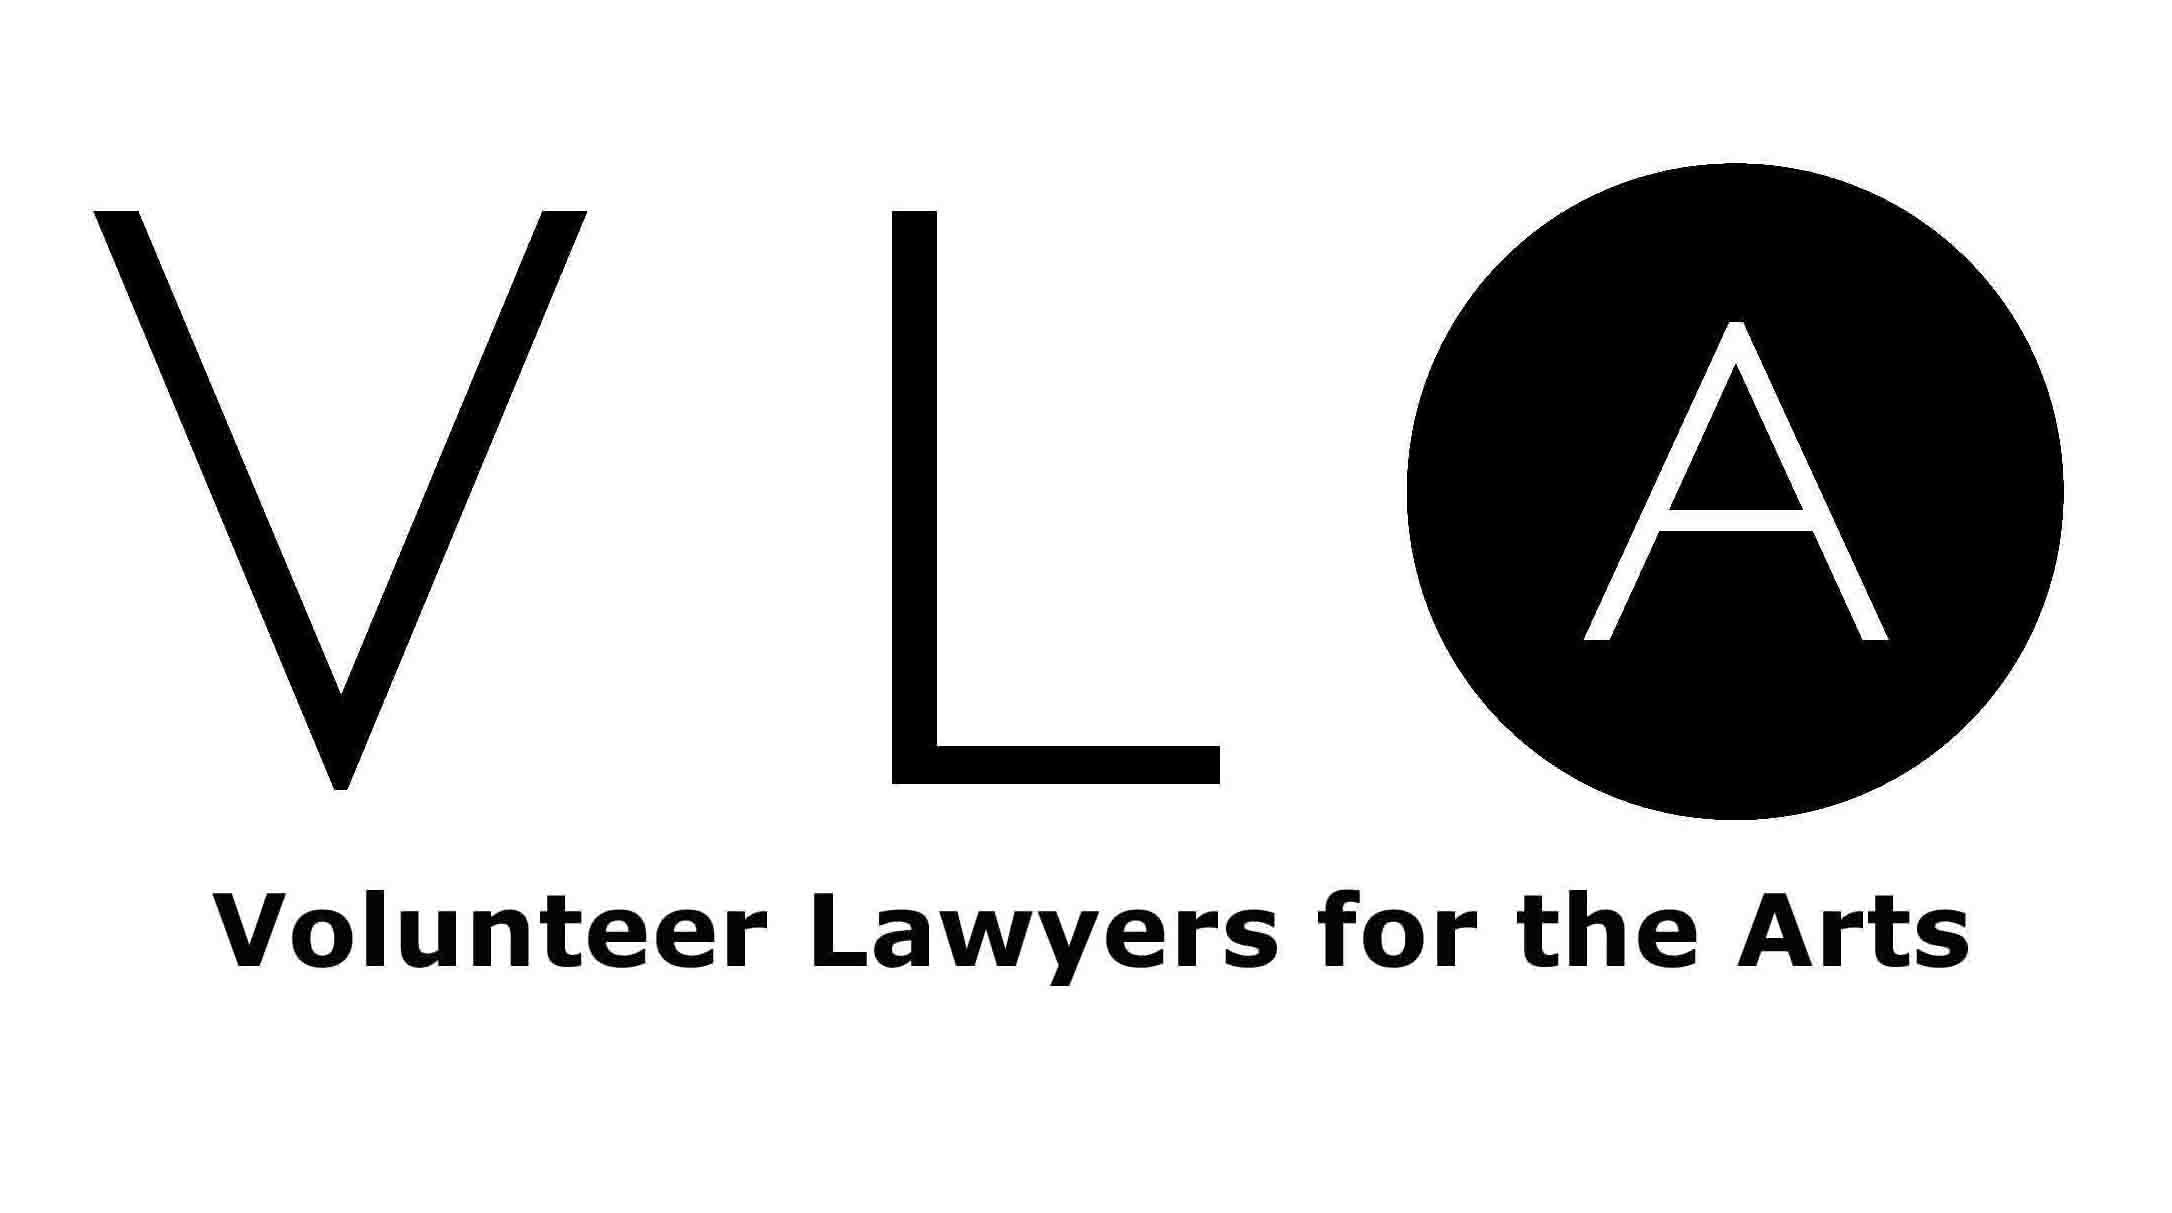 Volunteer Lawyers for the Arts